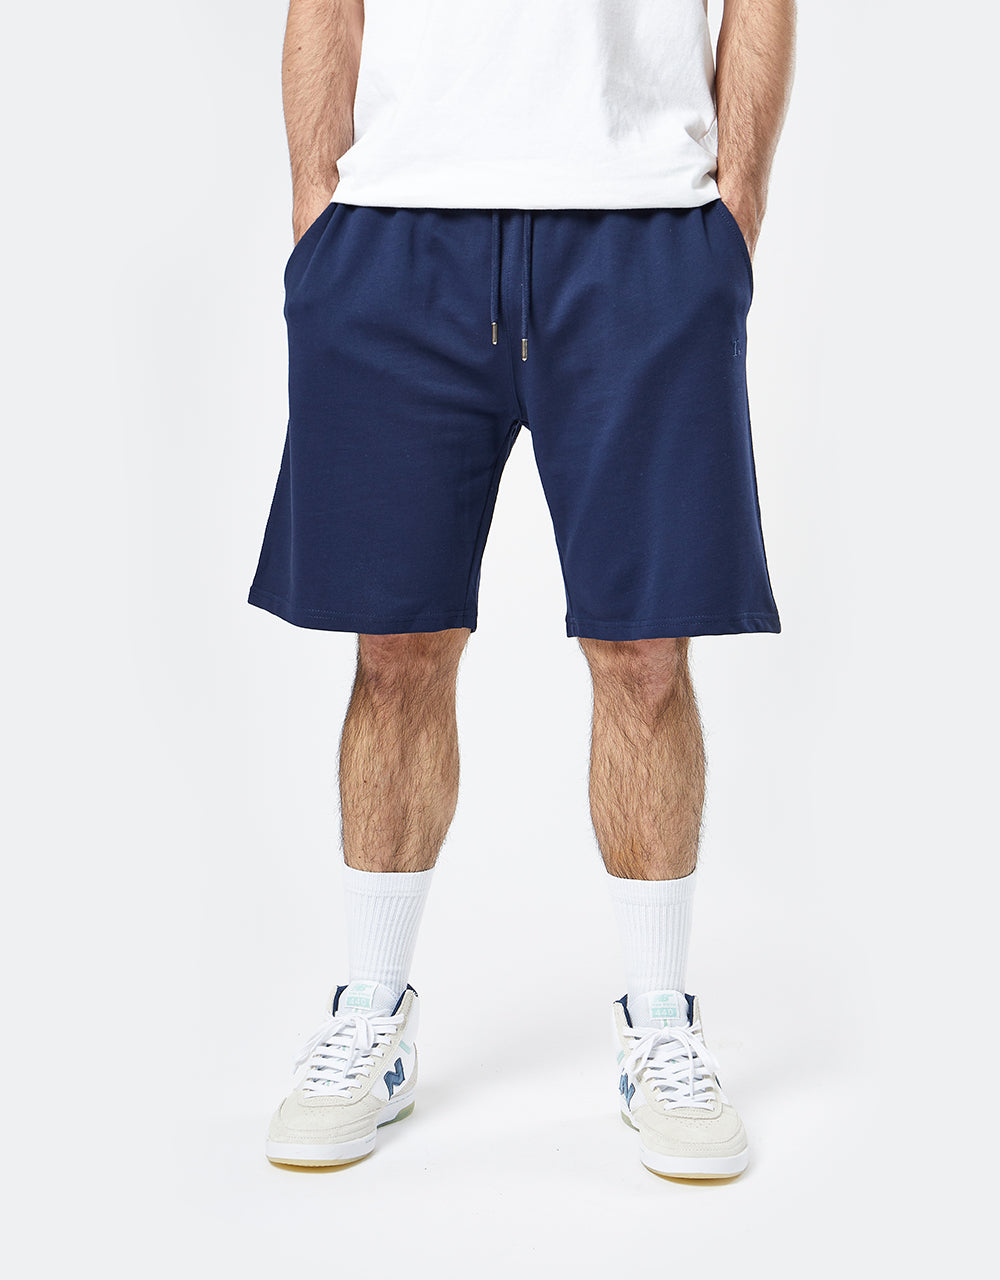 Route One Jersey Pool Shorts - Navy